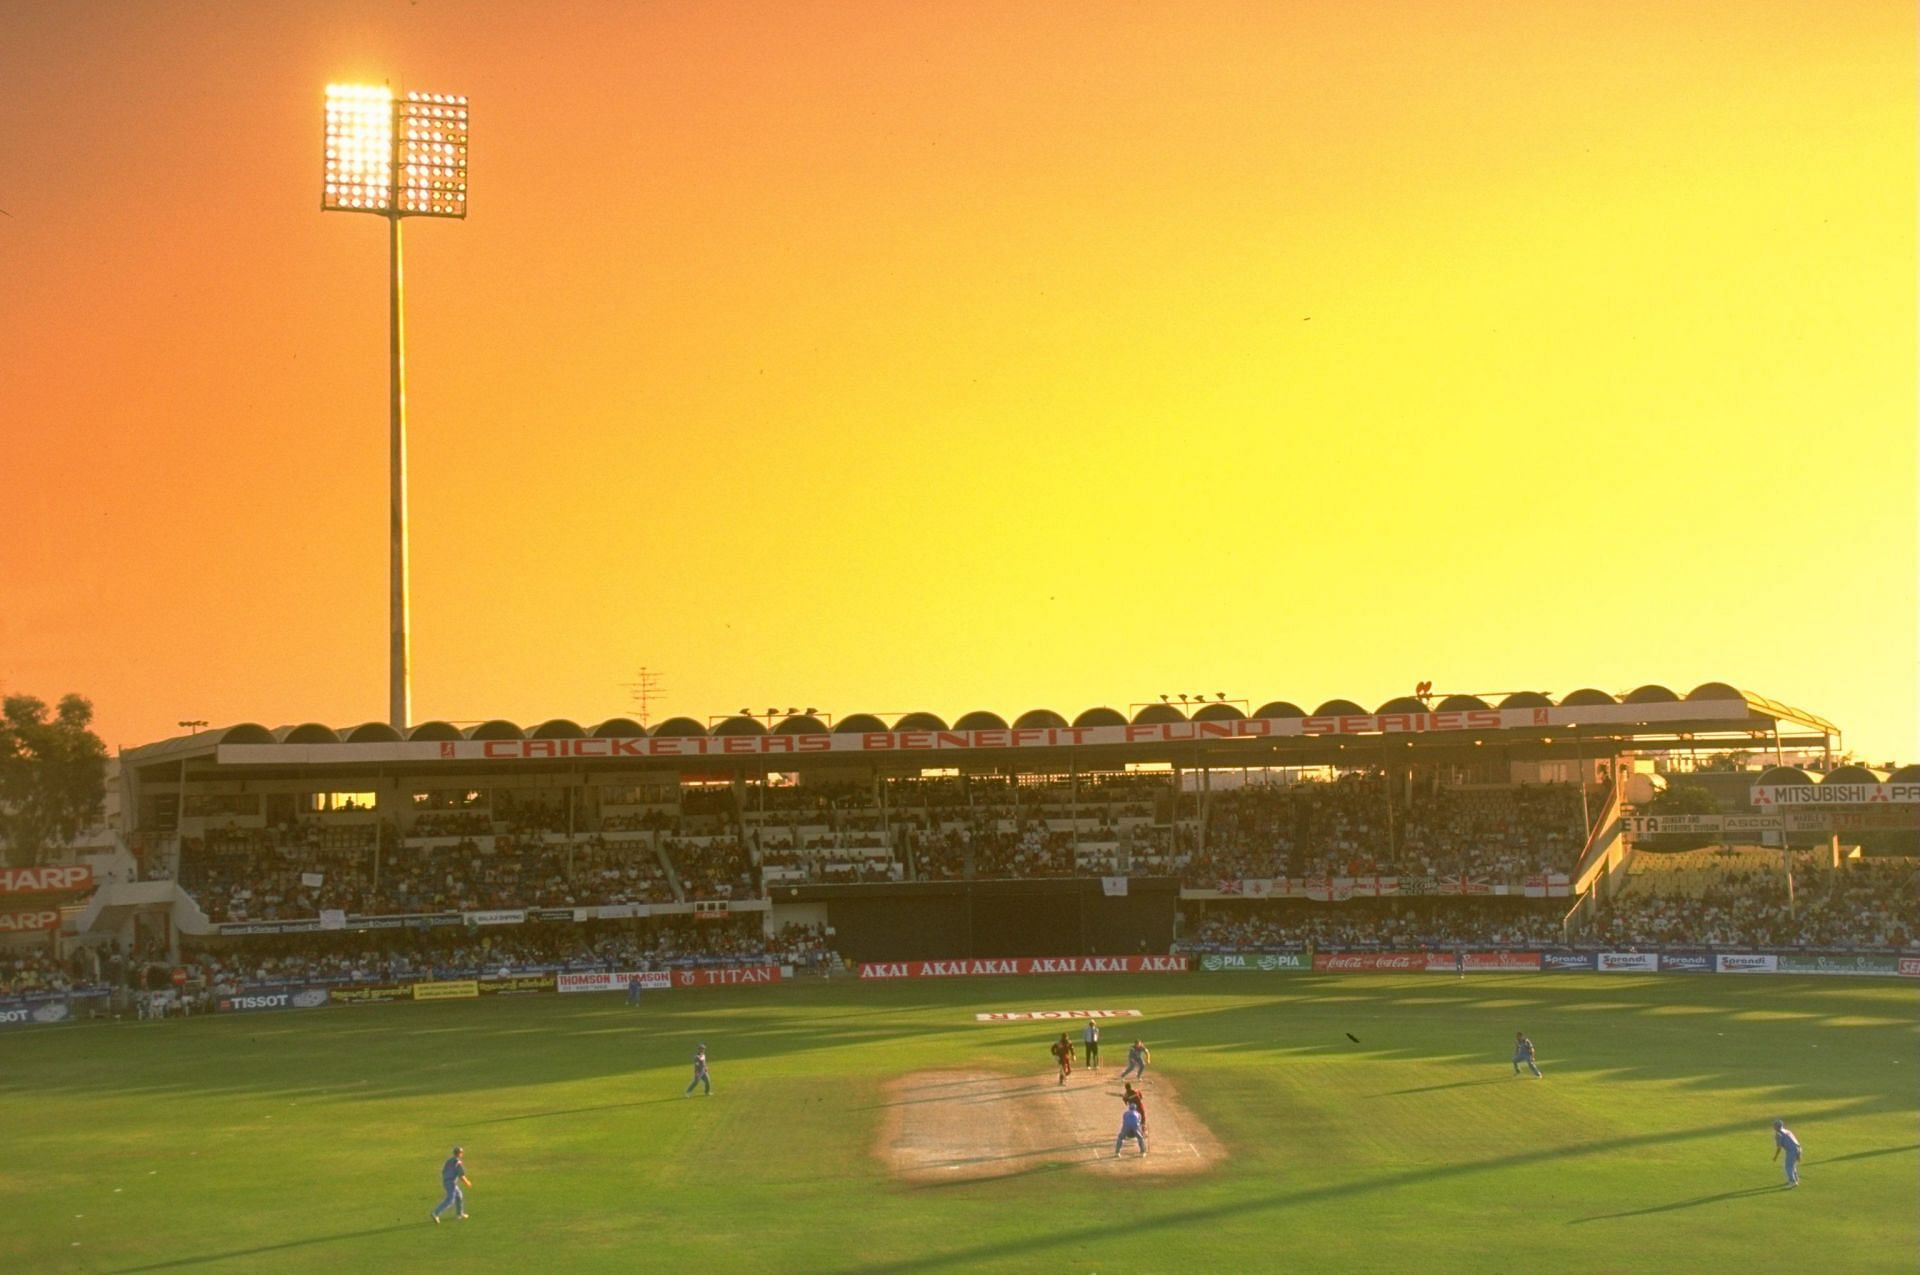 Sharjah Cricket Ground has been an iconic stadium. [Pic Credit: Getty images]